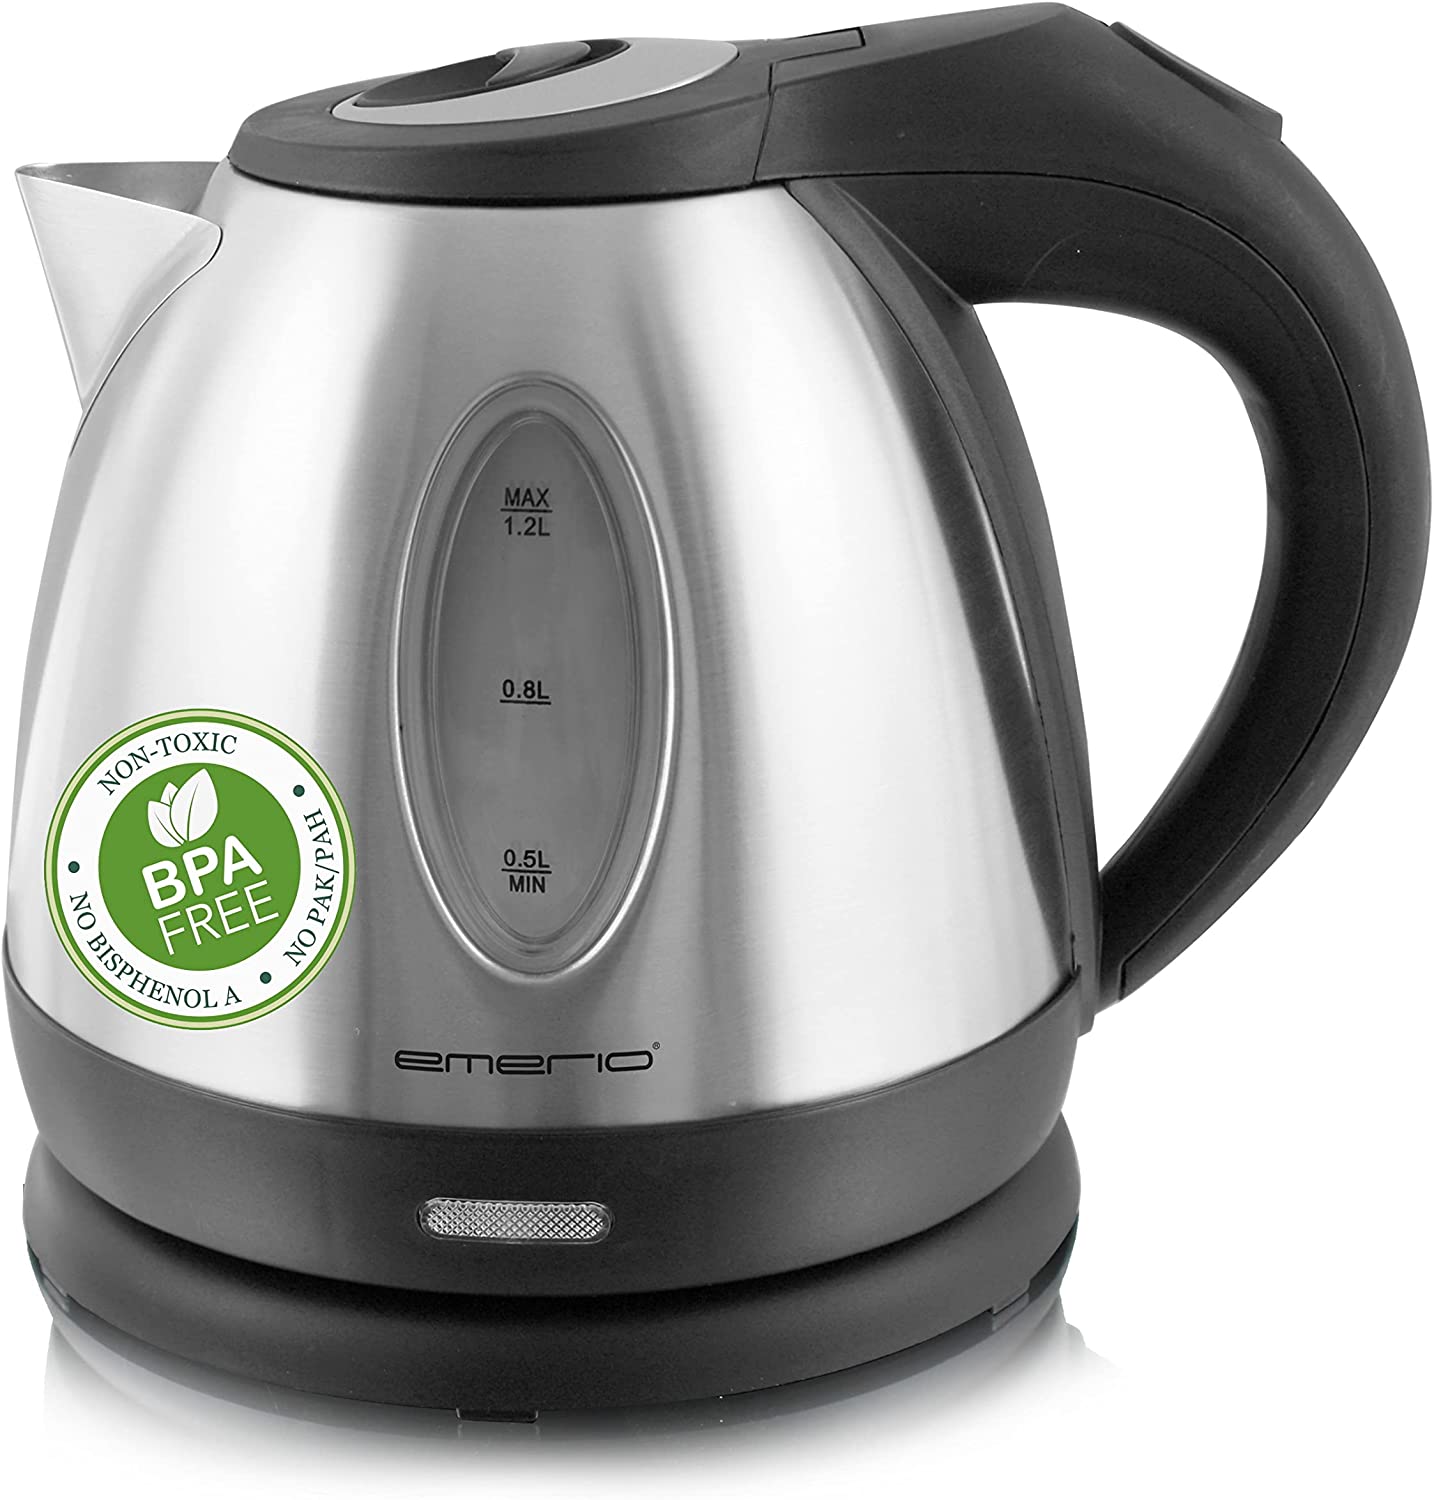 Emerio WK-108079 Stainless Steel Kettle, 1.2 Lites, 1500 watts, 360 ° WIRED BASE, WILESS Kettle, BPA-Free, Covered Heating Element, Auto-Off, Ideal for Home, Camping Or Office